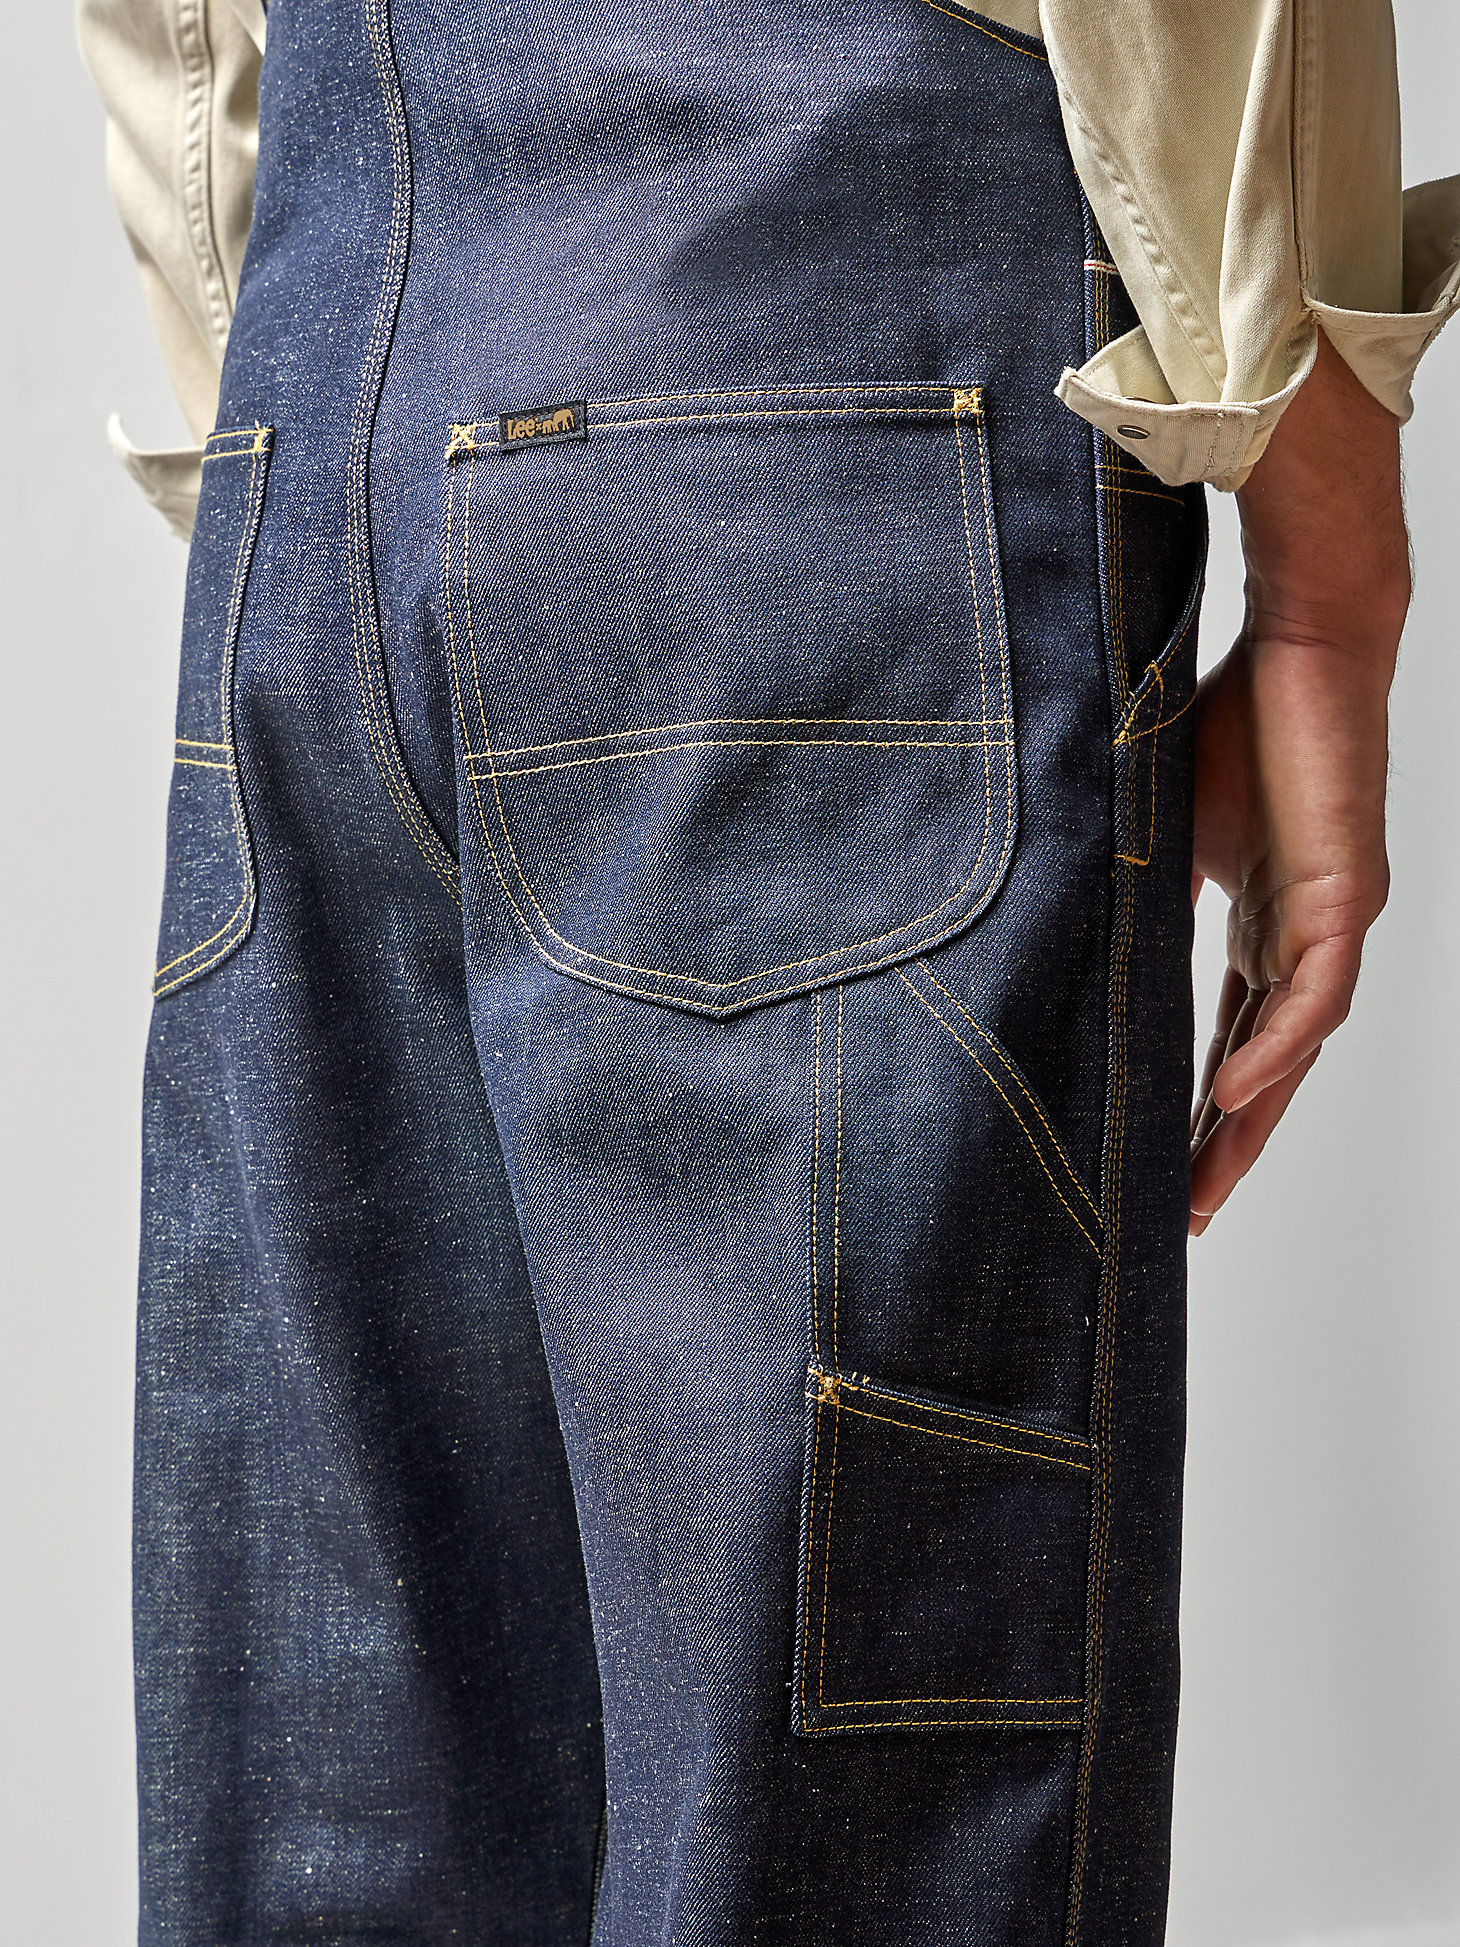 Men's Lee® x The Brooklyn Circus® Whizit Zip Overall in Indigo Selvedge alternative view 7